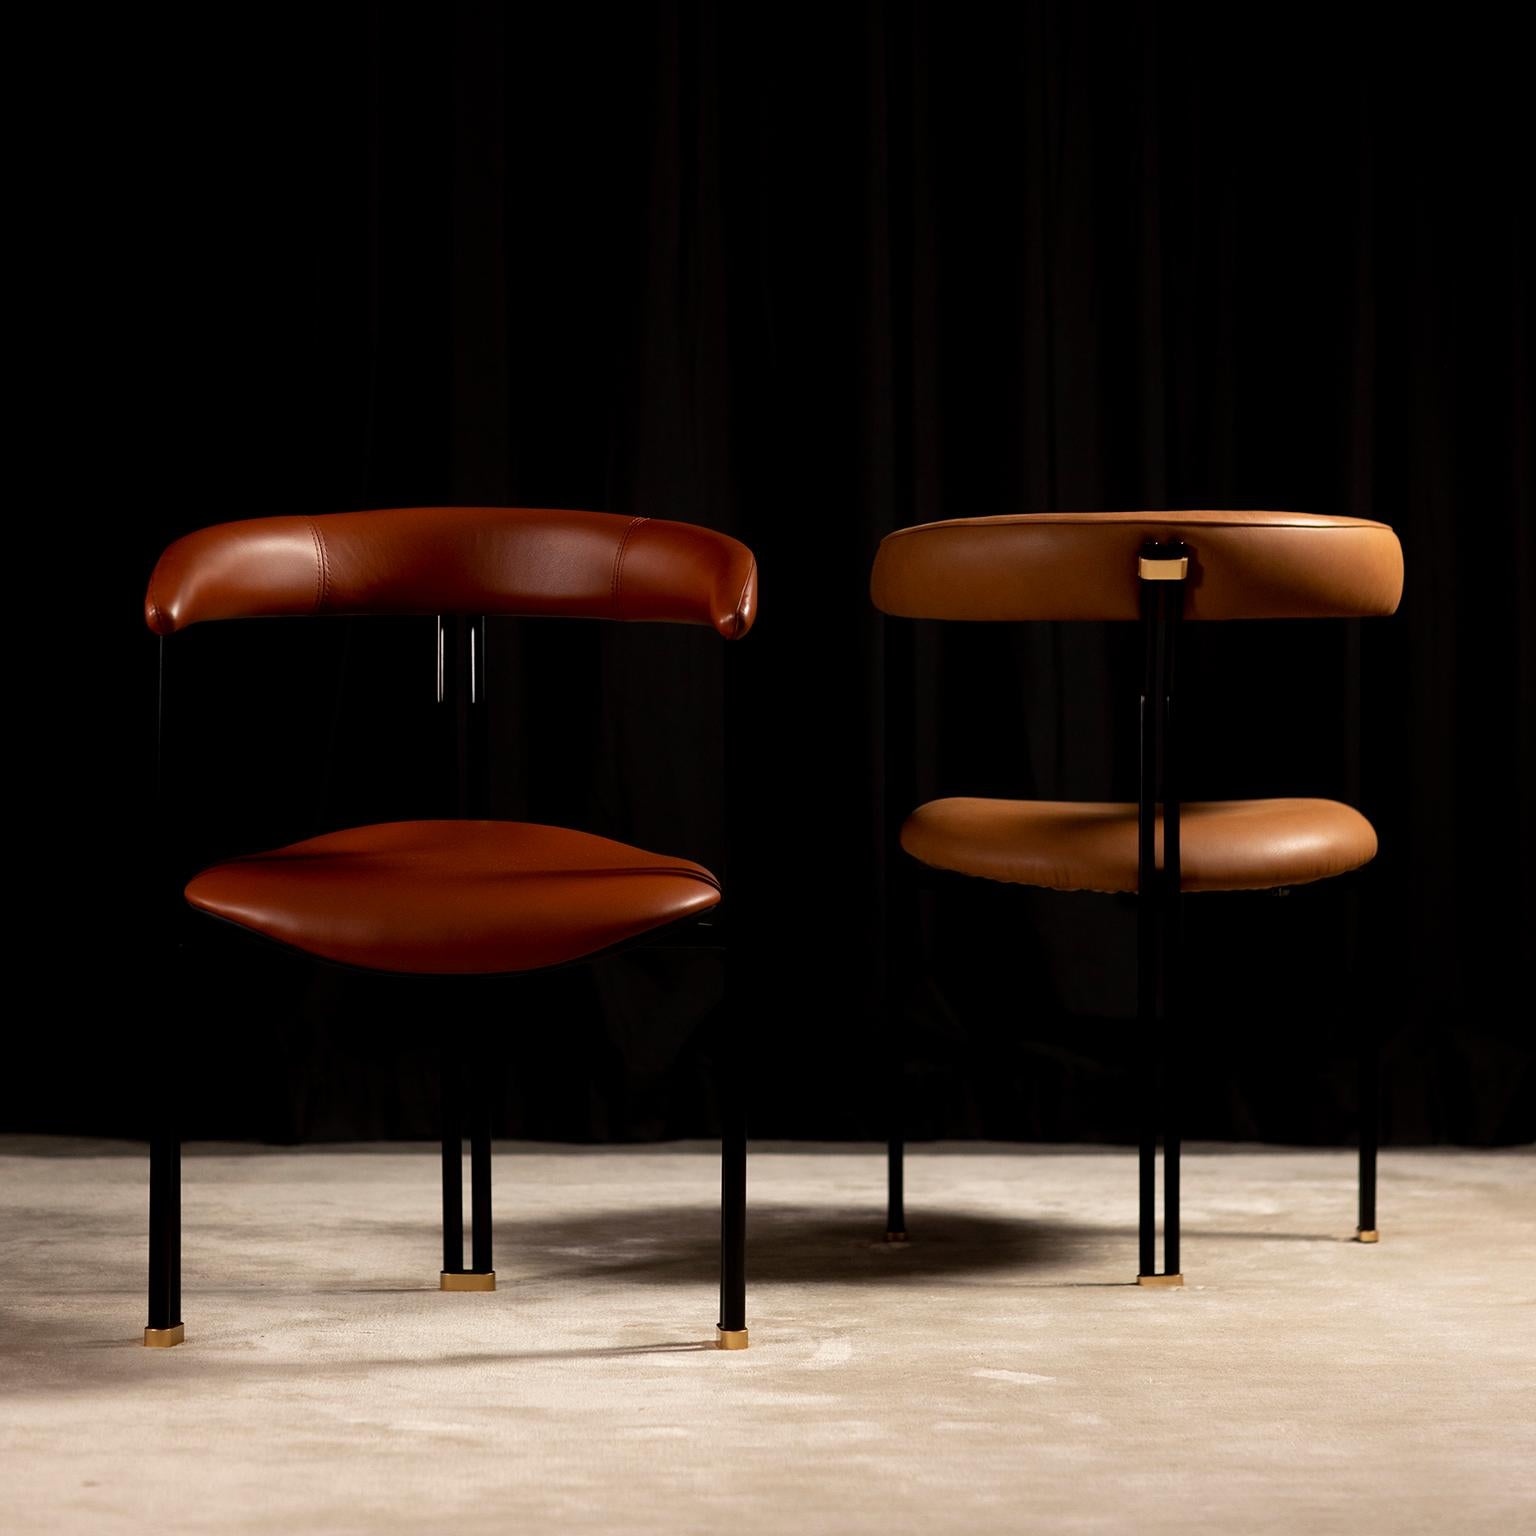 Hand-Crafted Modern Maia Dining Chairs, Italian Leather, Handmade in Portugal by Greenapple For Sale